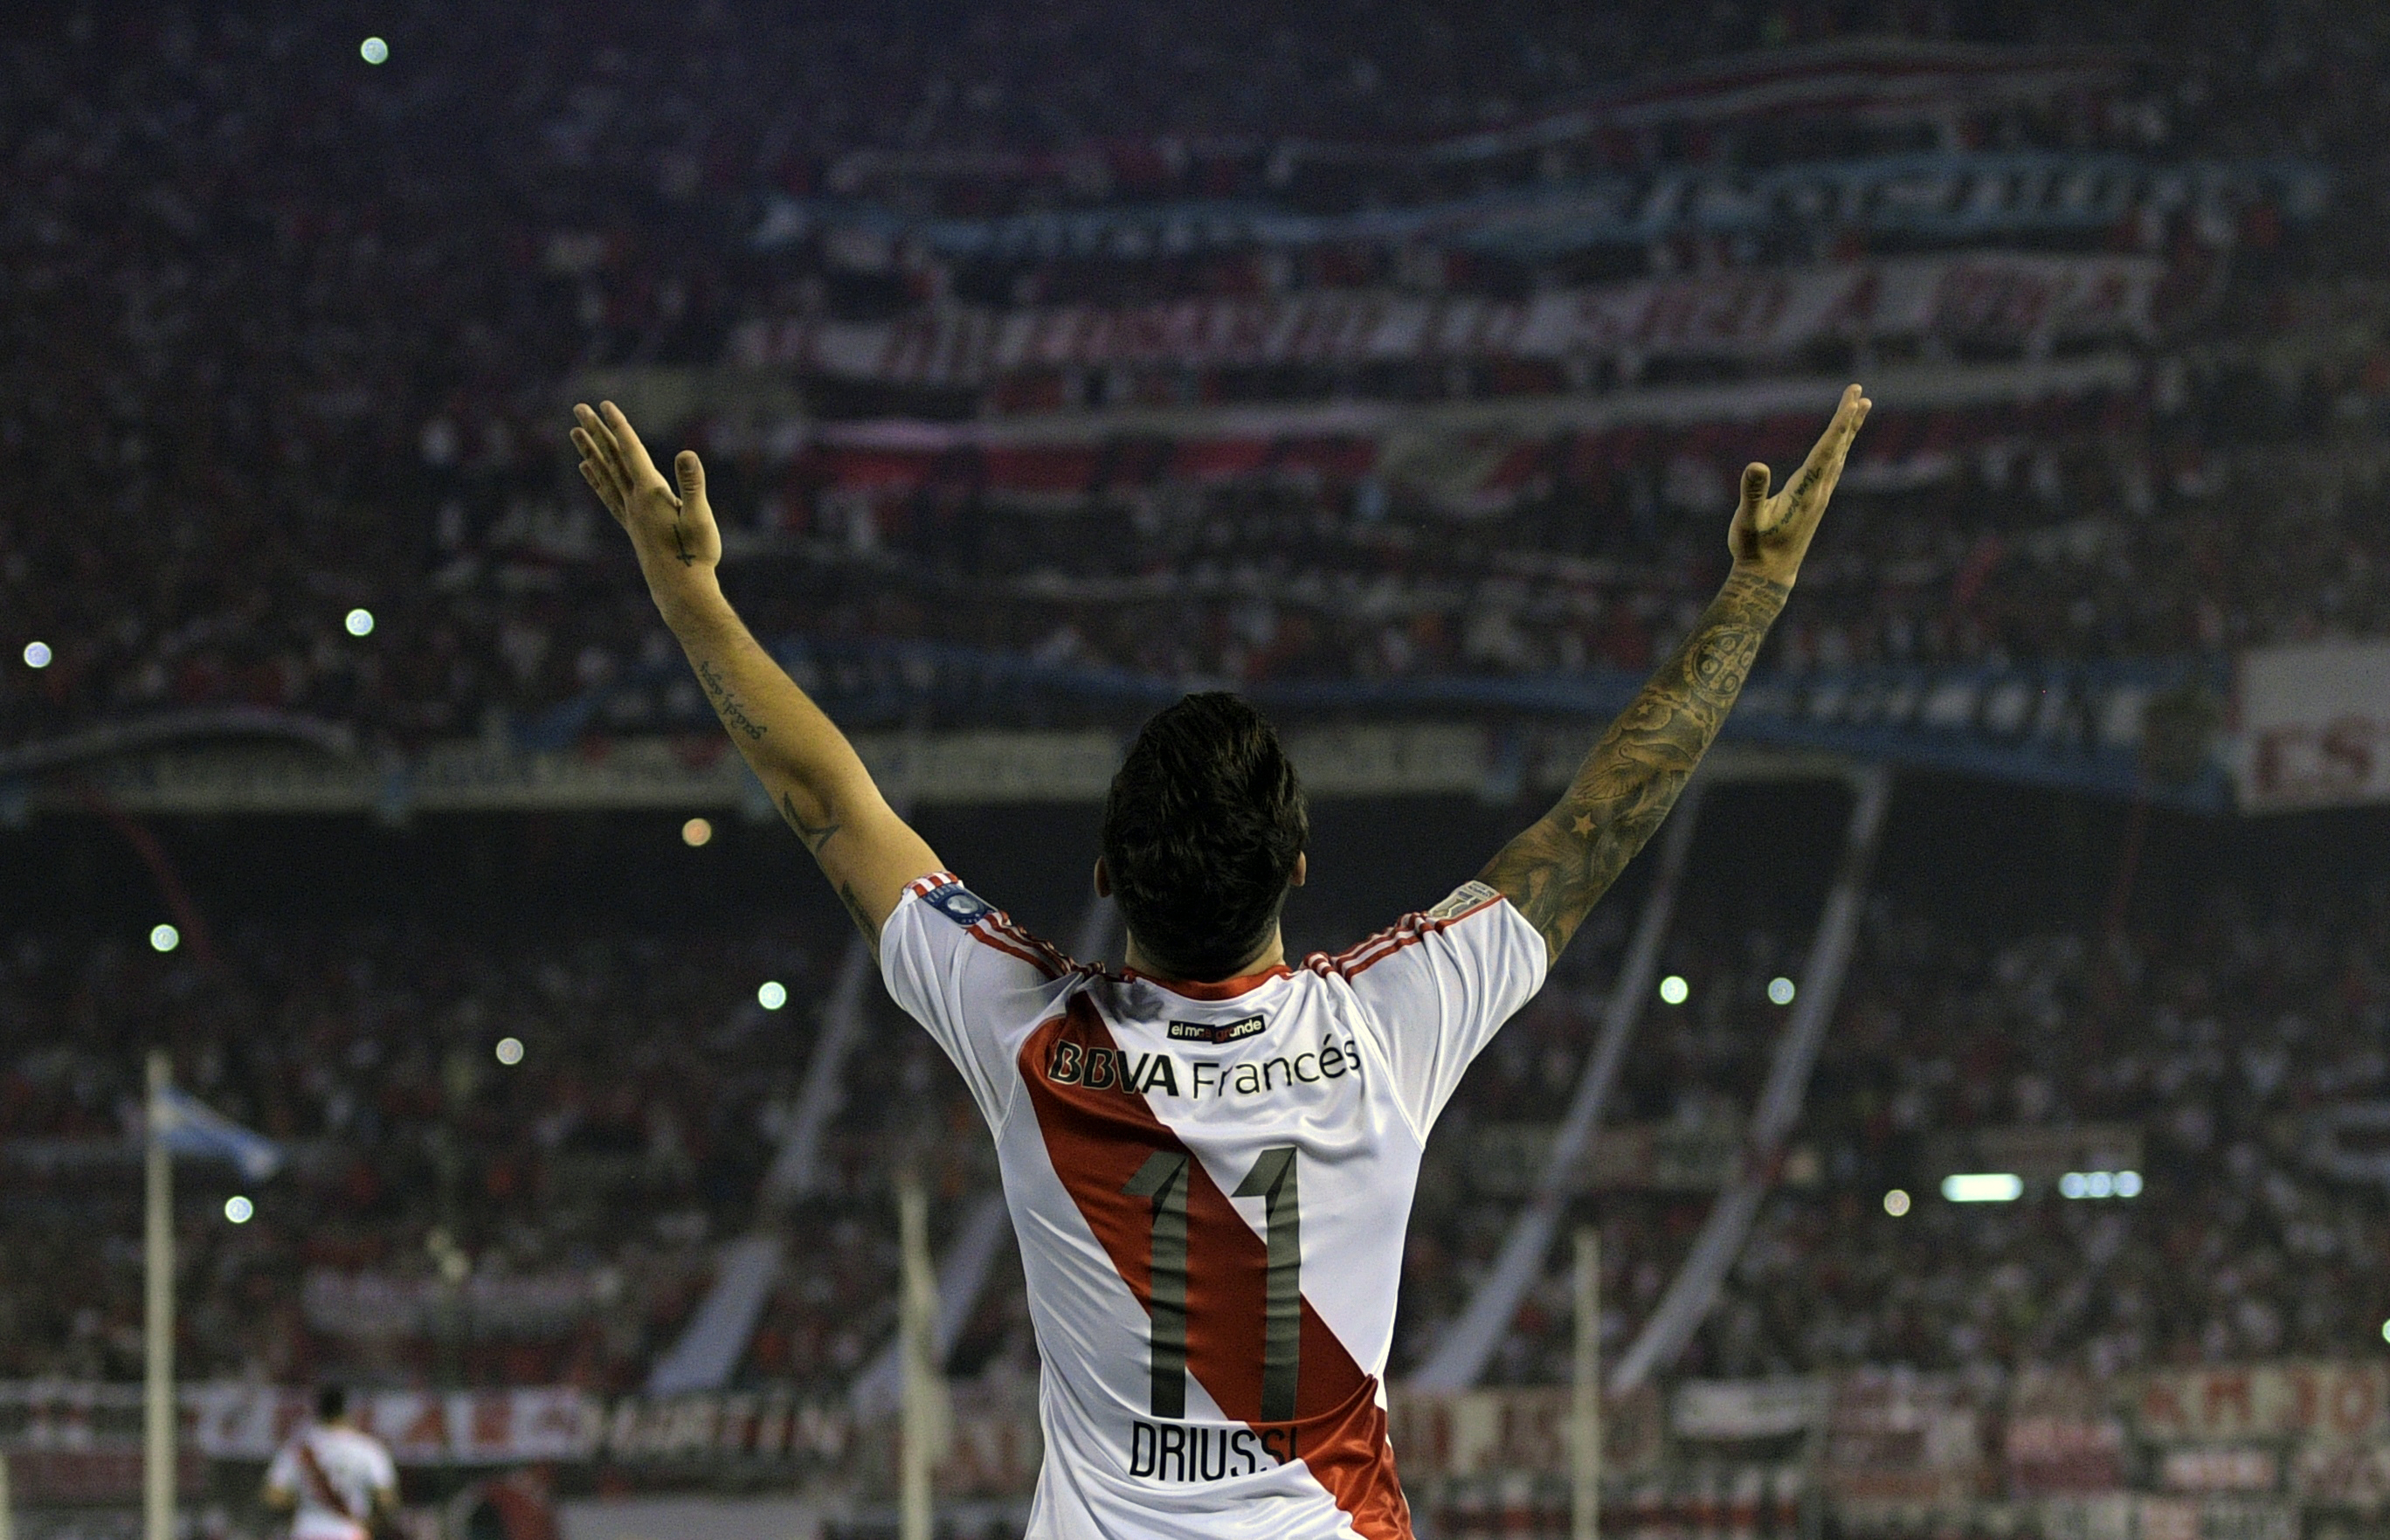 Argentina's River Plate forward Sebastian Driussi celebrates after scoring a goal against Colombia's Independiente Santa Fe during their Recopa Sudamericana 2016 second leg final football match at the Monumental stadium in Buenos Aires on August 25, 2016. / AFP / JUAN MABROMATA        (Photo credit should read JUAN MABROMATA/AFP/Getty Images)